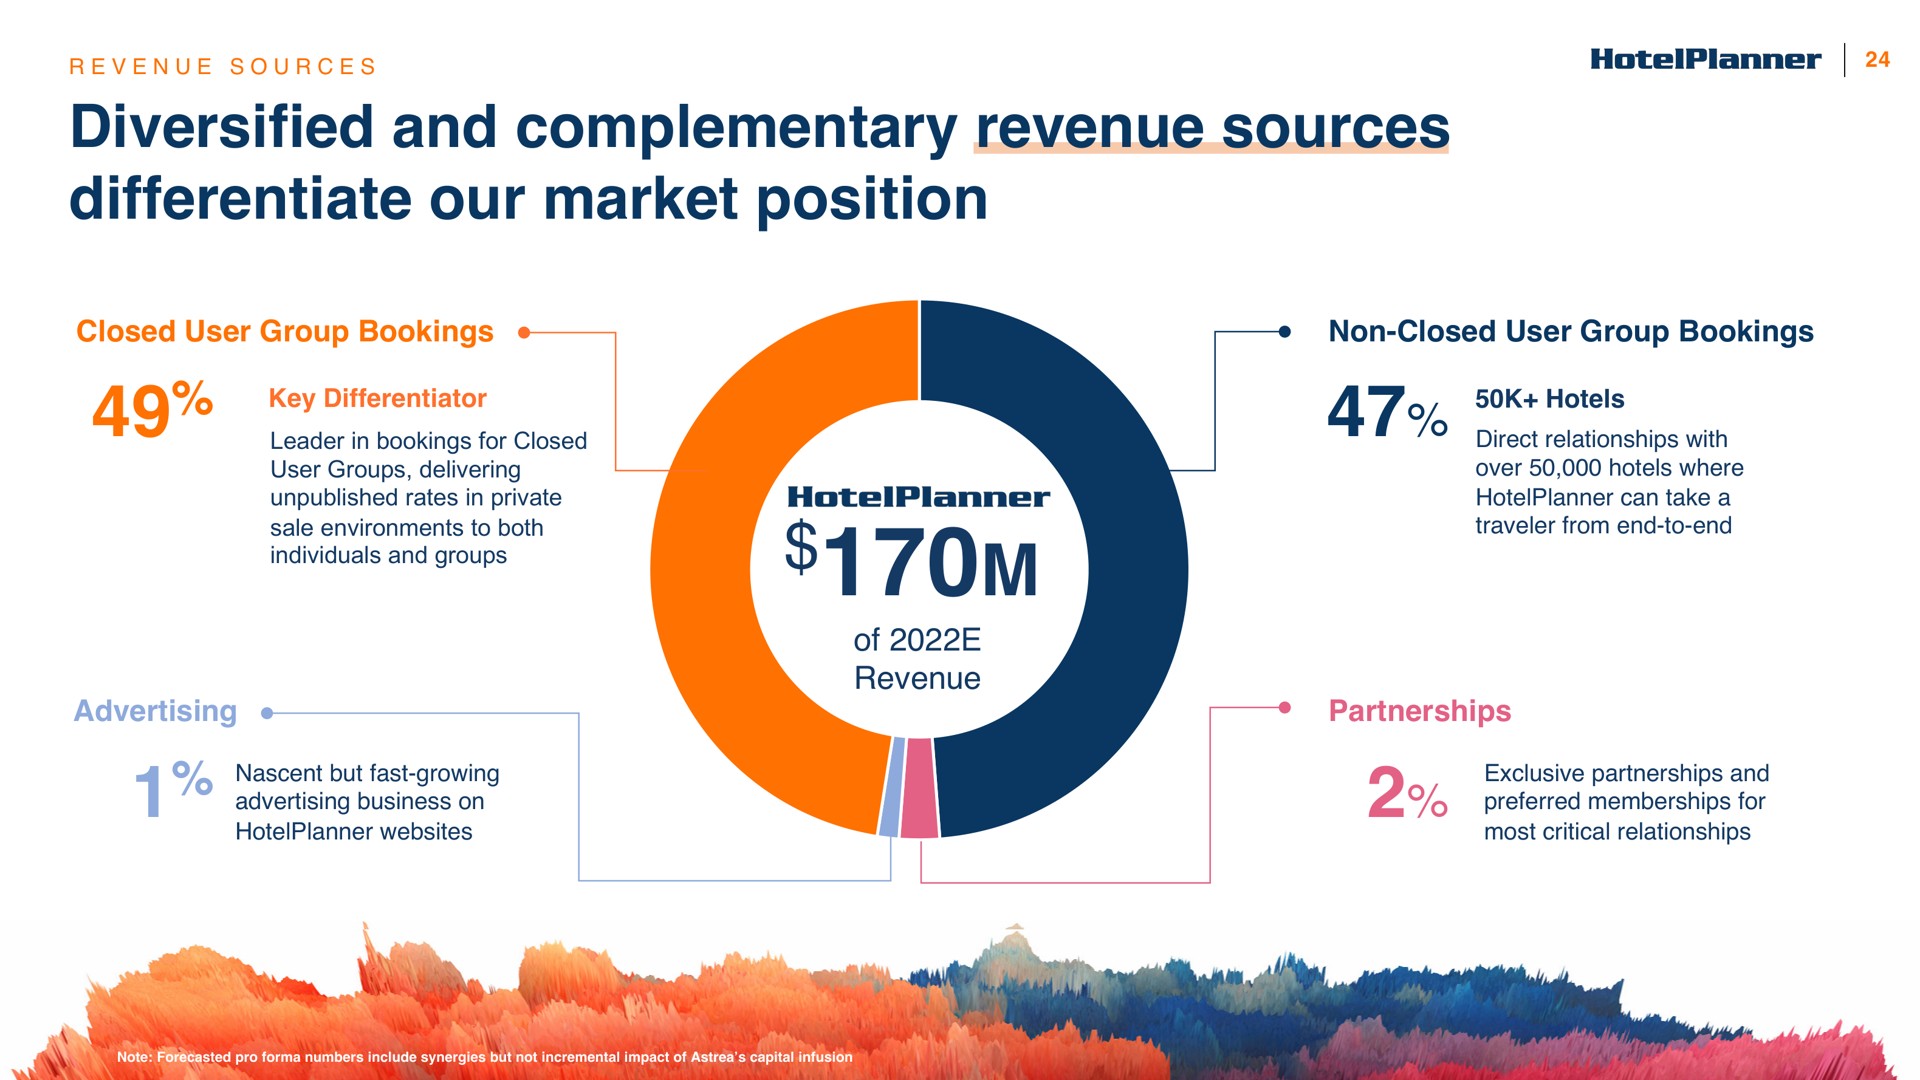 diversified and complementary revenue sources differentiate our market position | HotelPlanner